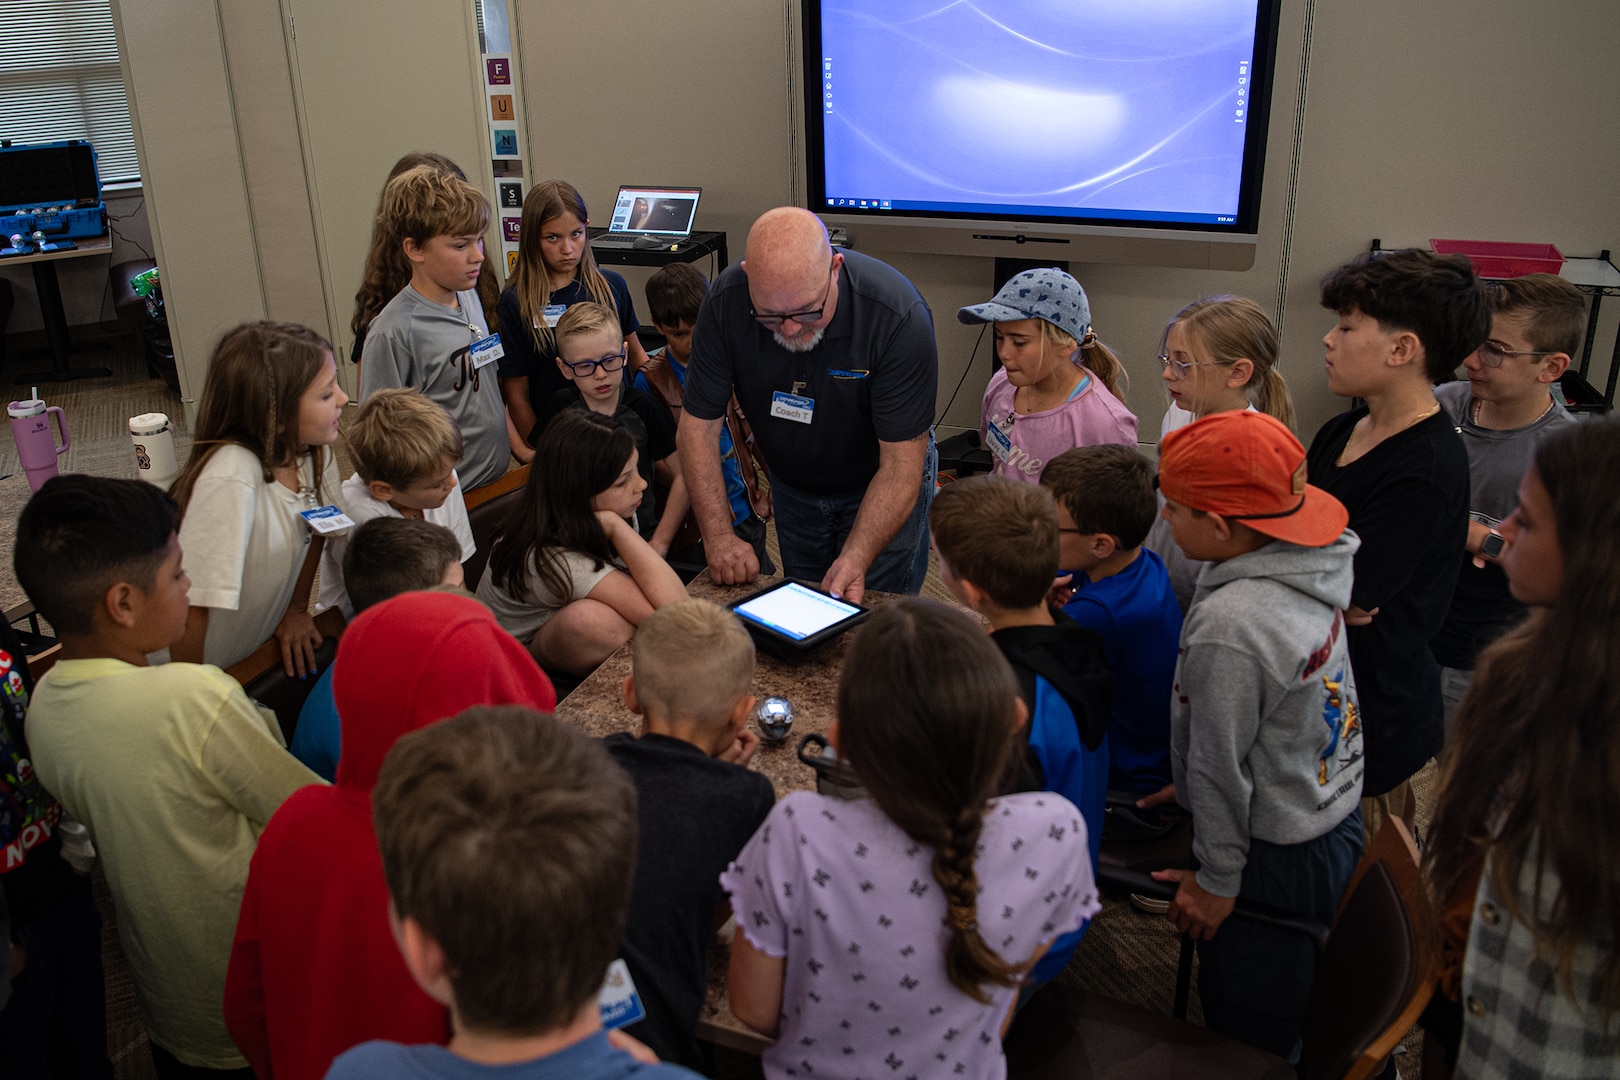 Larry Tettleton, an instructor with STARBASE Oklahoma City, teaches campers how to program a small robot during the STARBASE OKC summer camp at Will Rogers Air National Guard Base in Oklahoma City, June 10, 2024. More than 50 children of Oklahoma National Guard members and Will Rogers Air National Guard base employees attended the camp where they took part in science experiments, built and coded robots to complete simple tasks, learned about computer aided design, and met with National Guard members to hear how STEM education helped propel them on successful careers in the military. (Oklahoma National Guard photo by Anthony Jones)